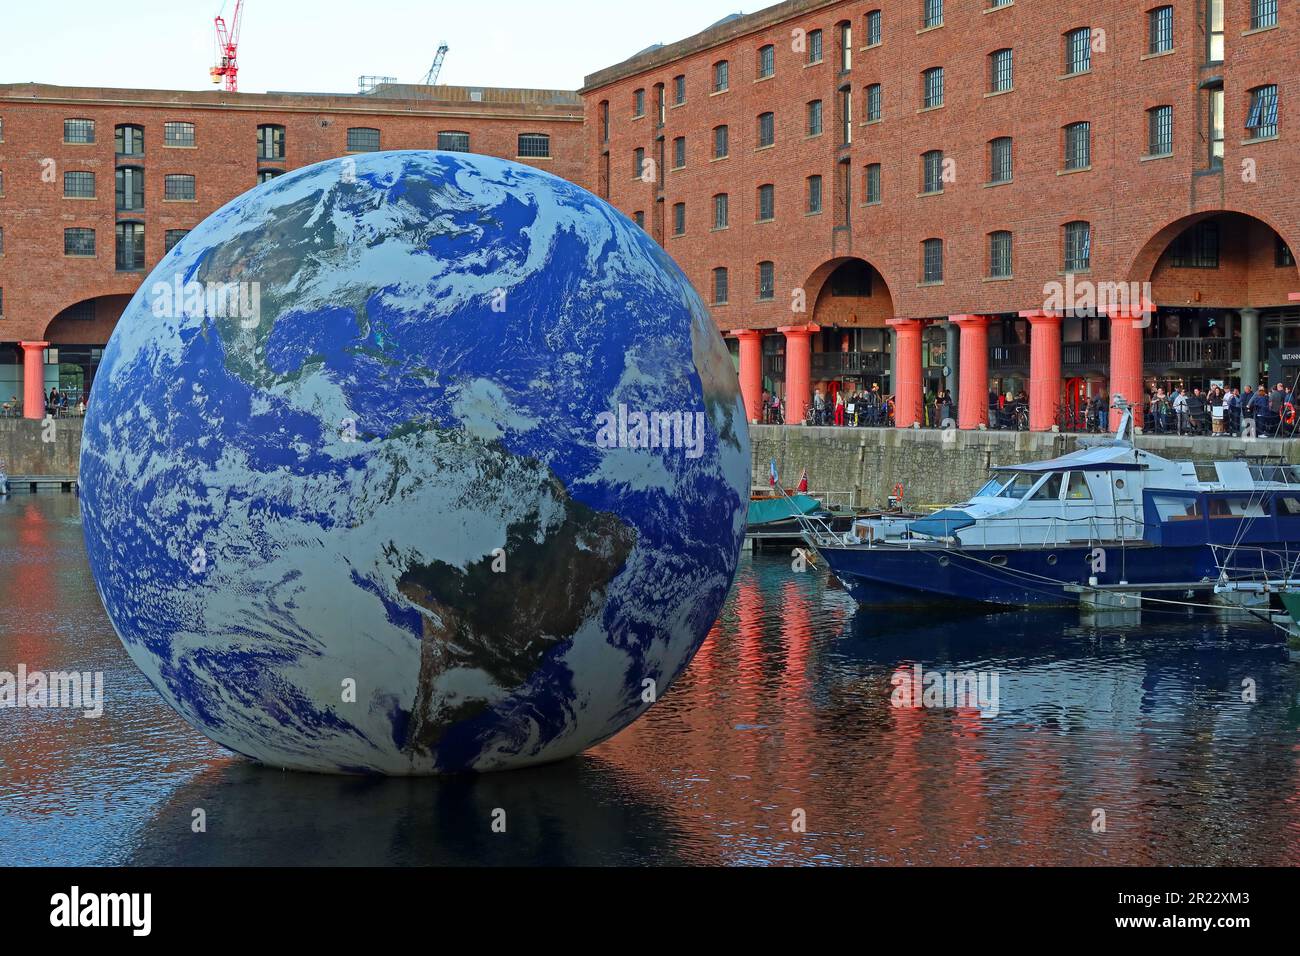 Luke Jerram Floating Earth comes to Liverpool's Royal Albert Dock, looking majestic on a sunset evening, in front of the Victorian port warehouses Stock Photo